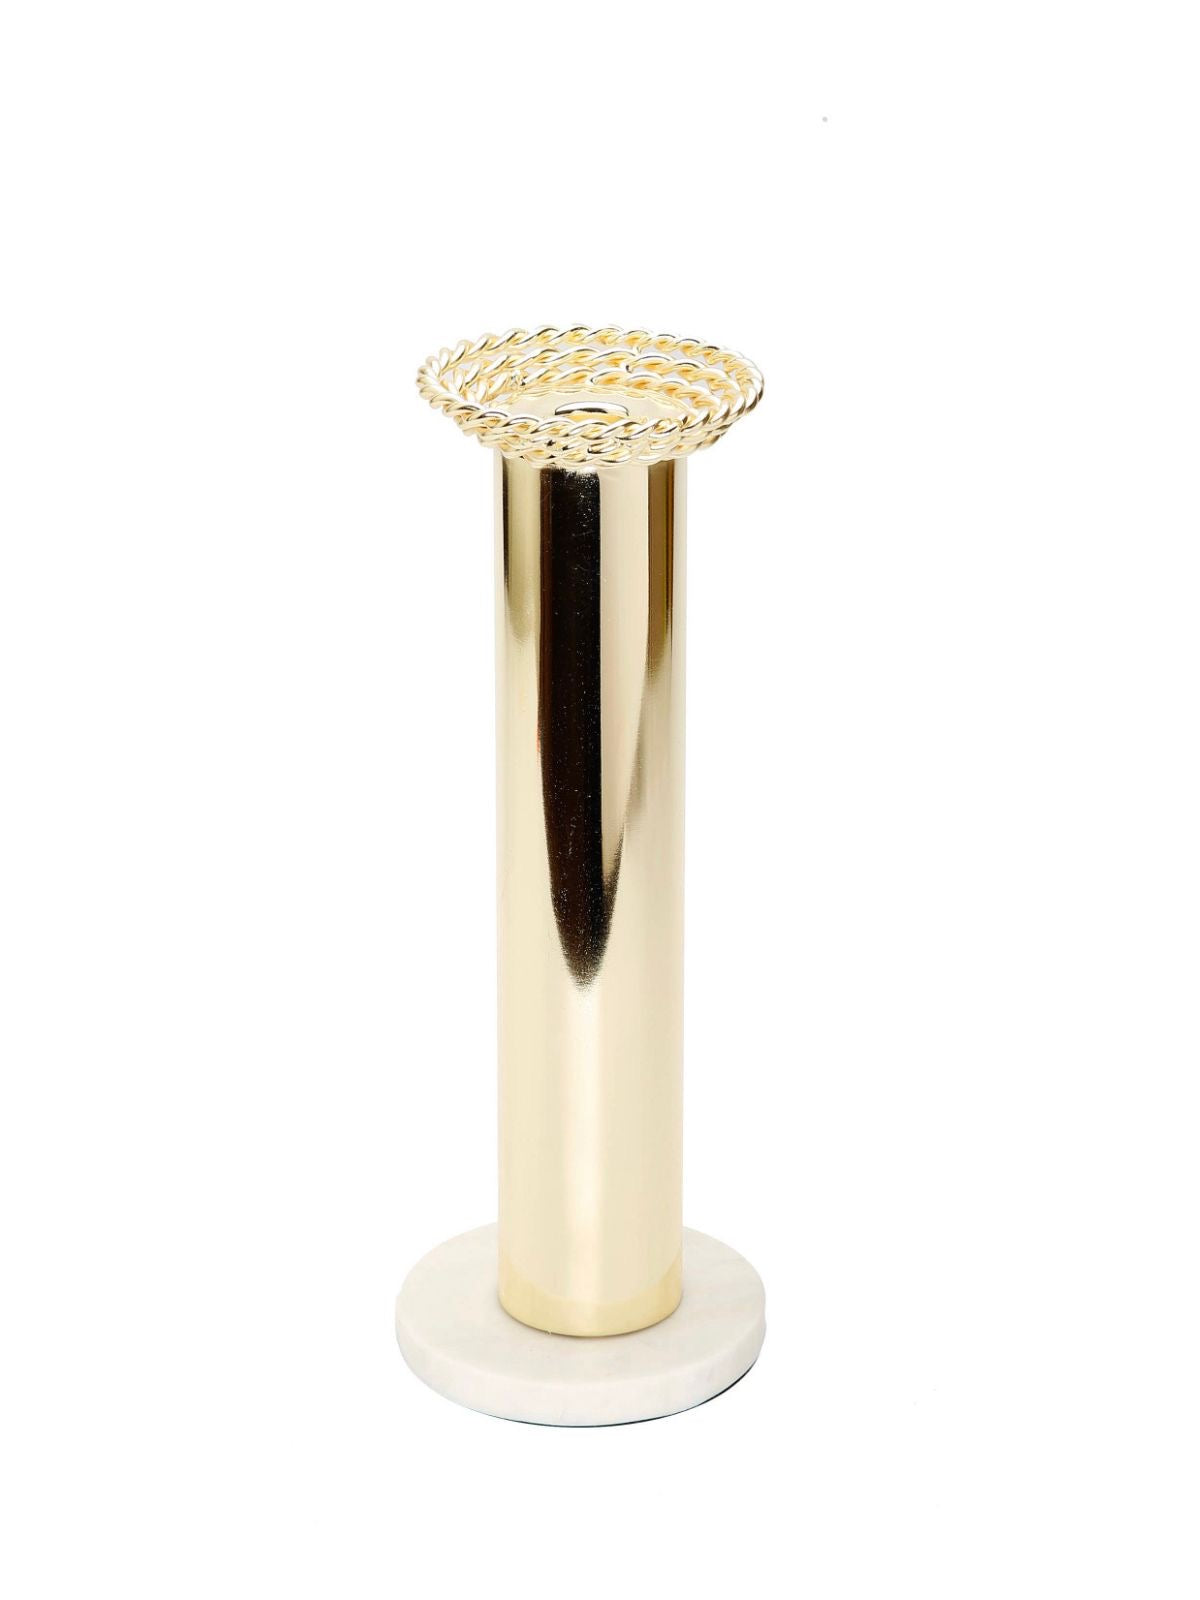 10.5H Candle Holder With Gold Metal Rope Design on Marble Base. Sold by KYA Home Decor.